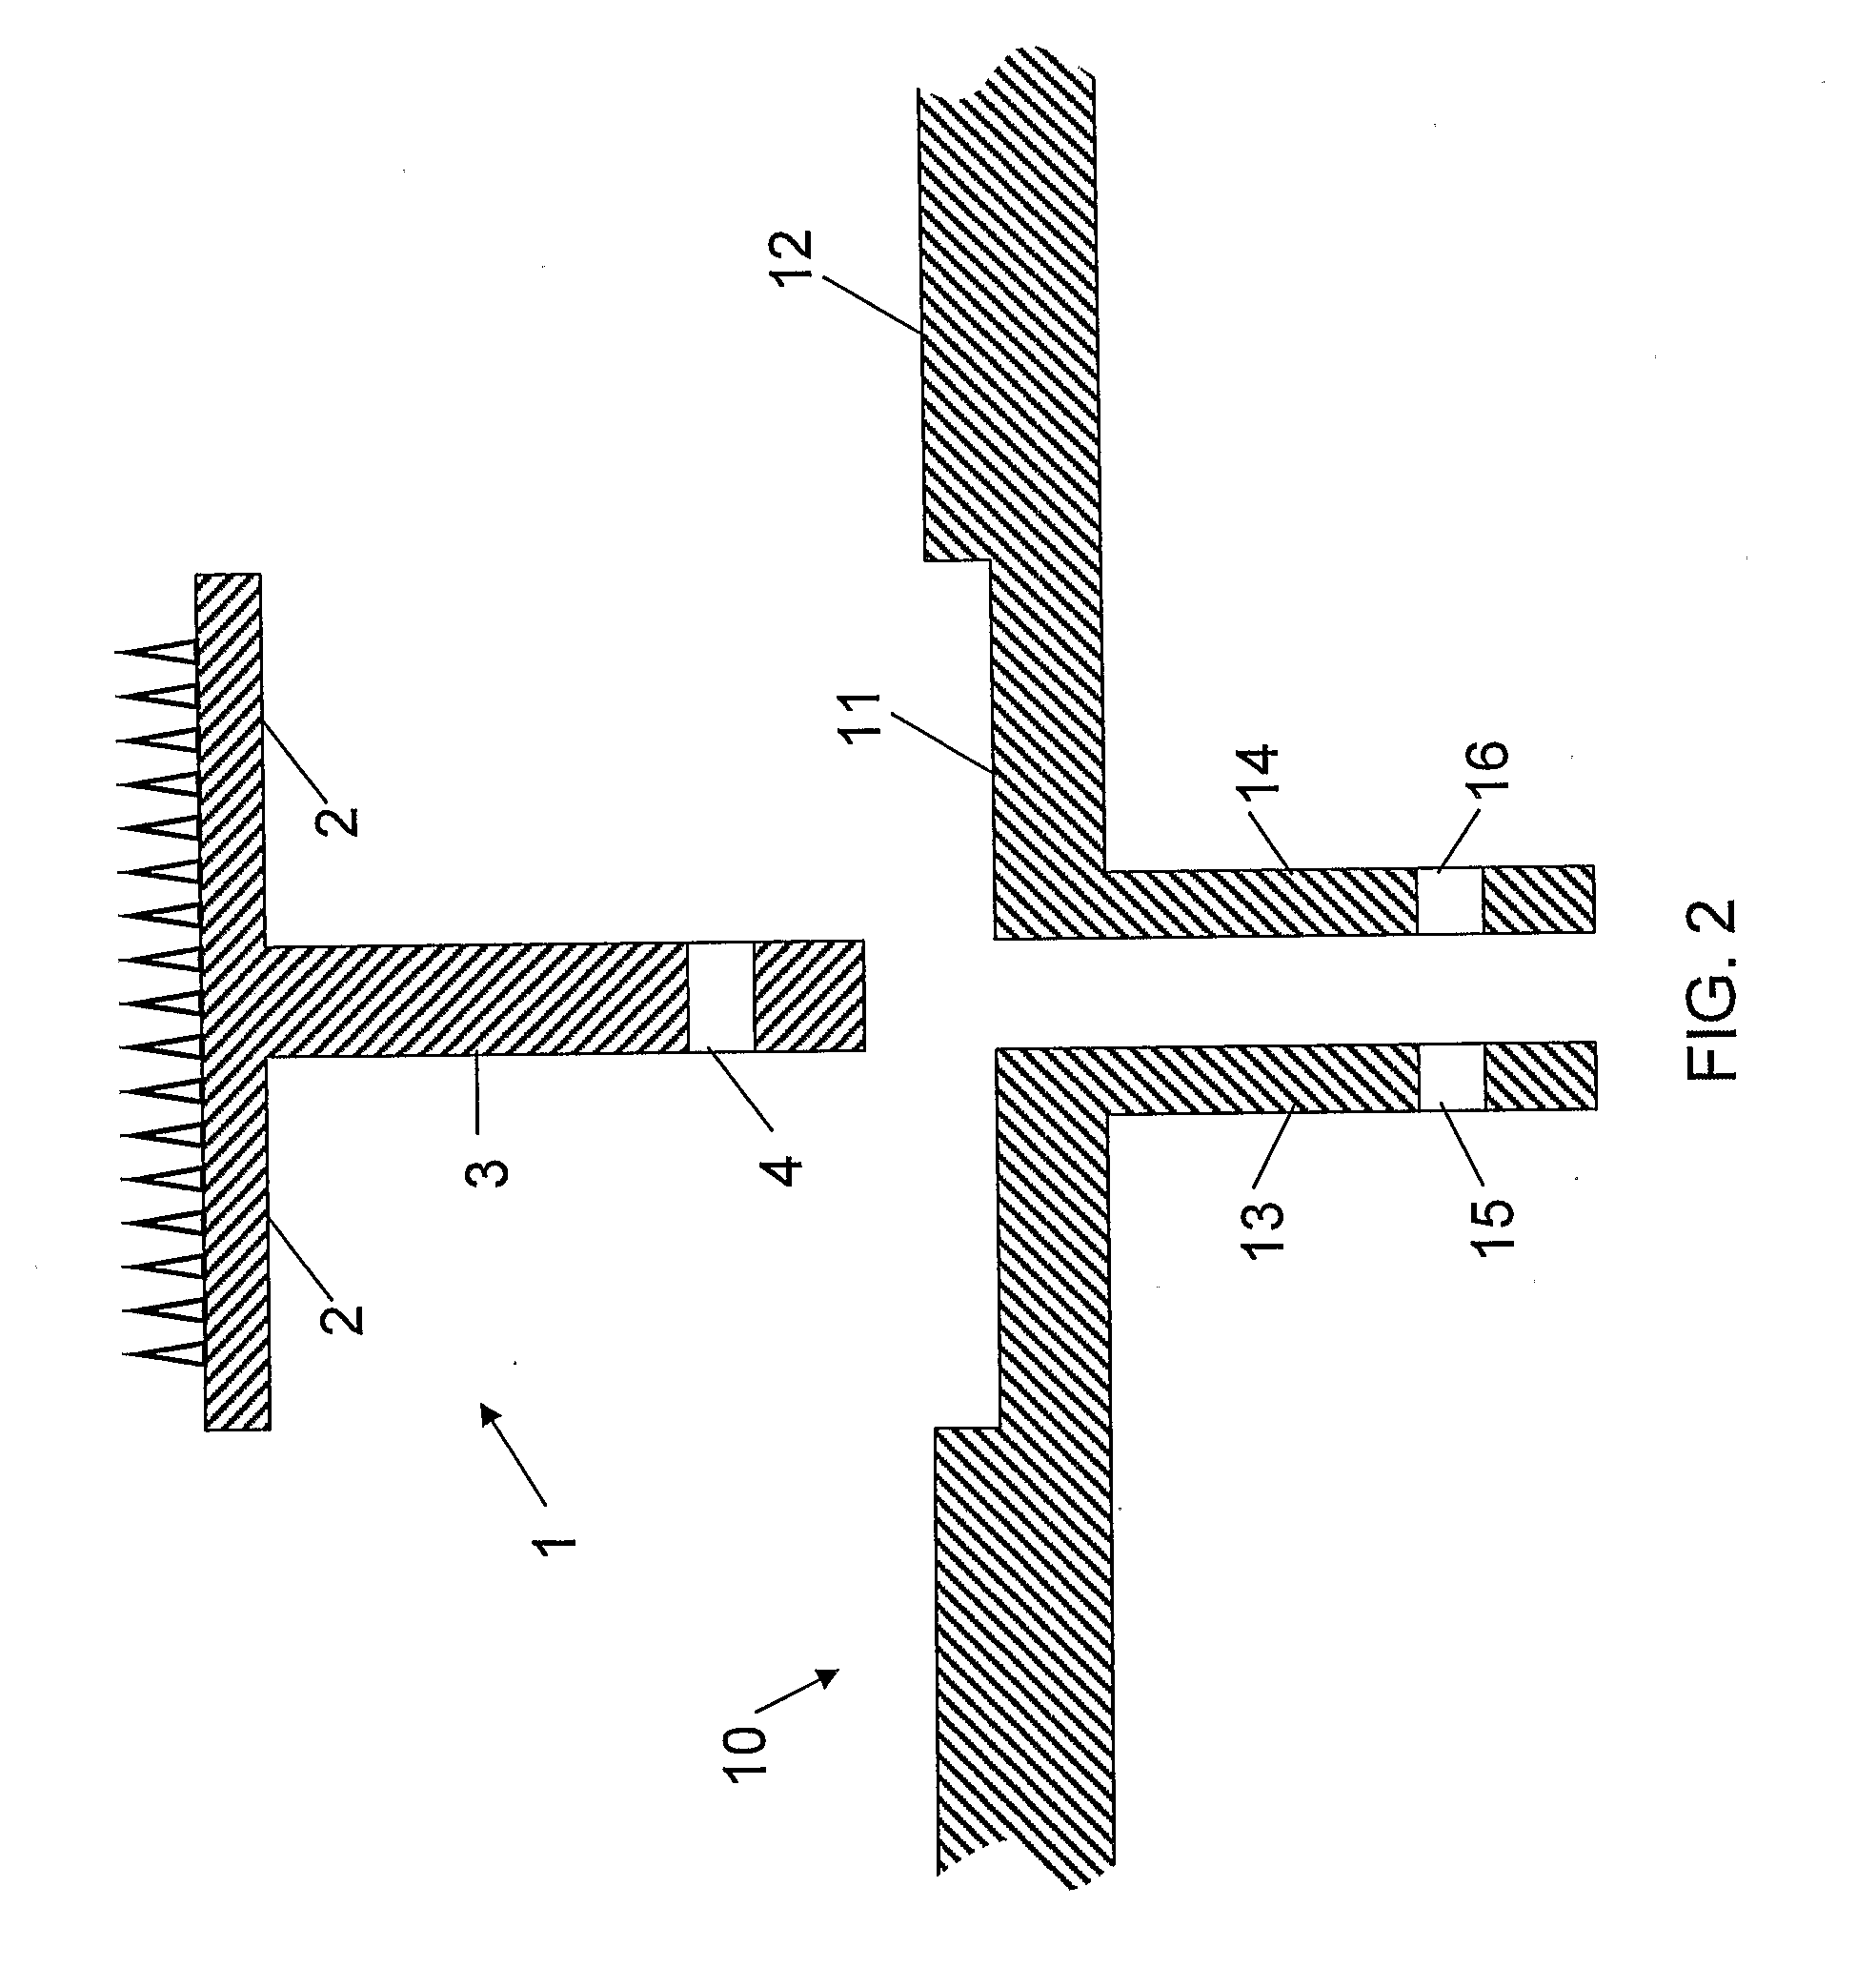 Preparation of a component for use in a joint